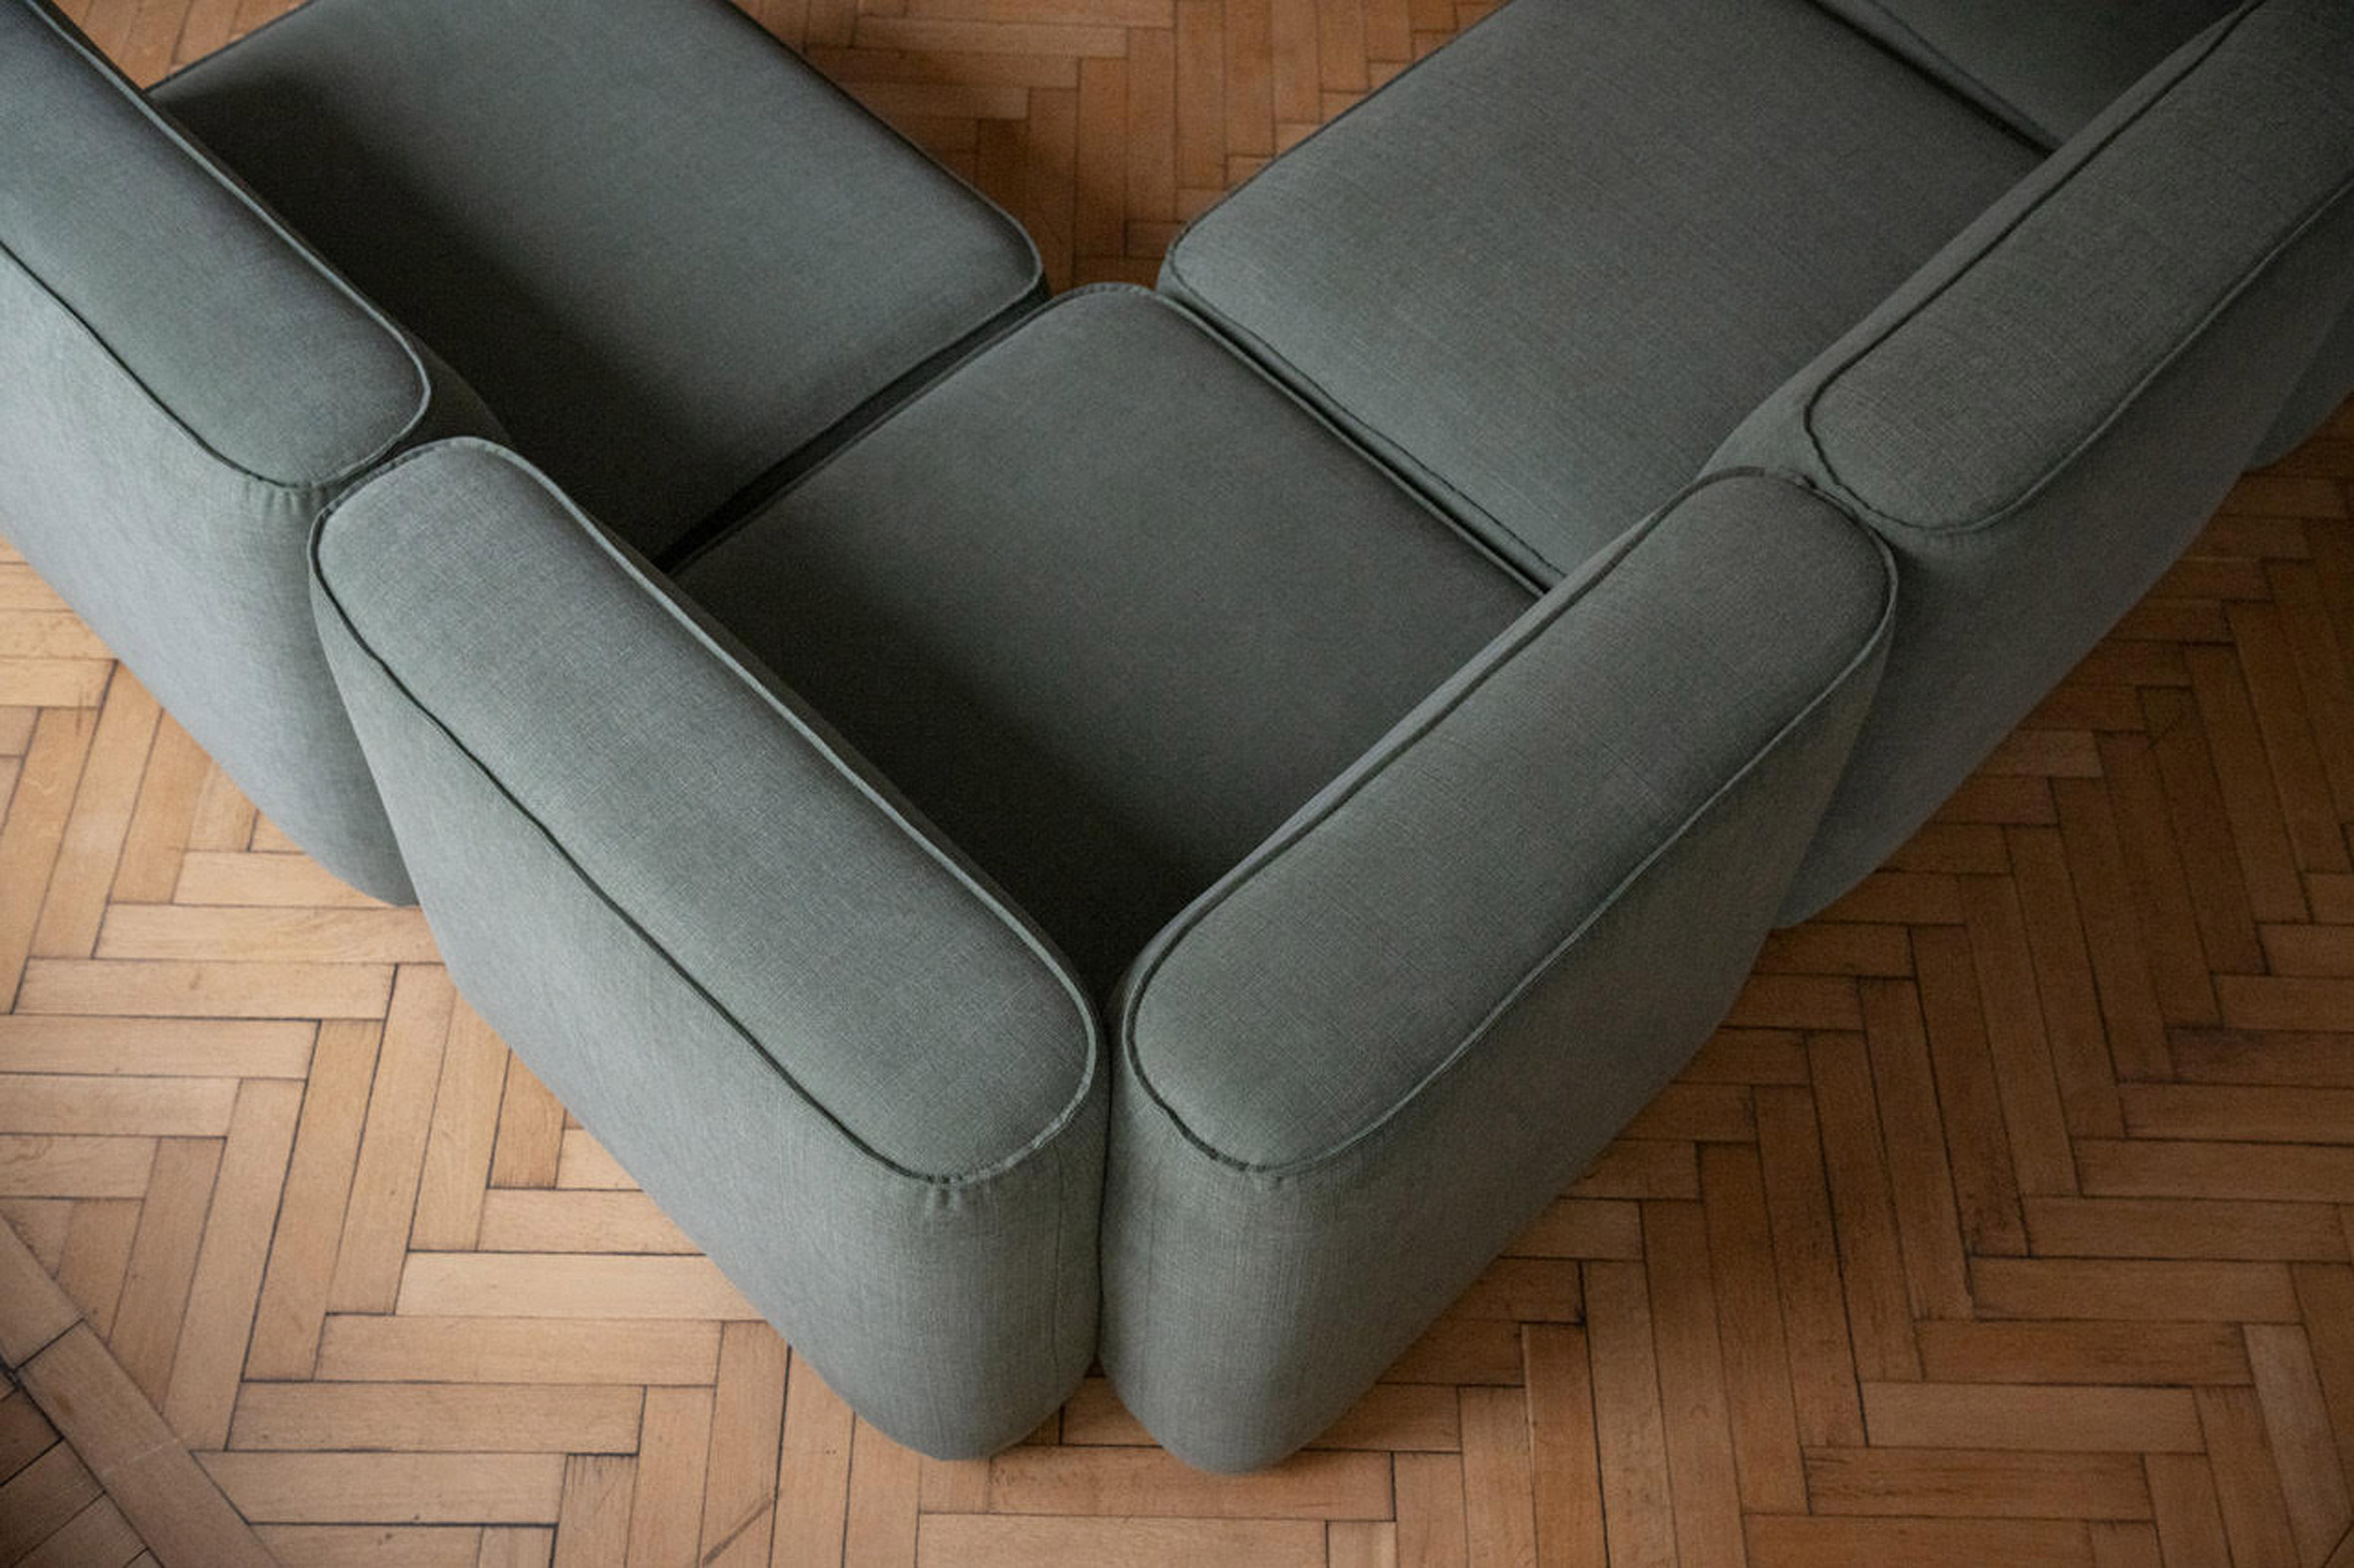 The Patch sofa from massproductions